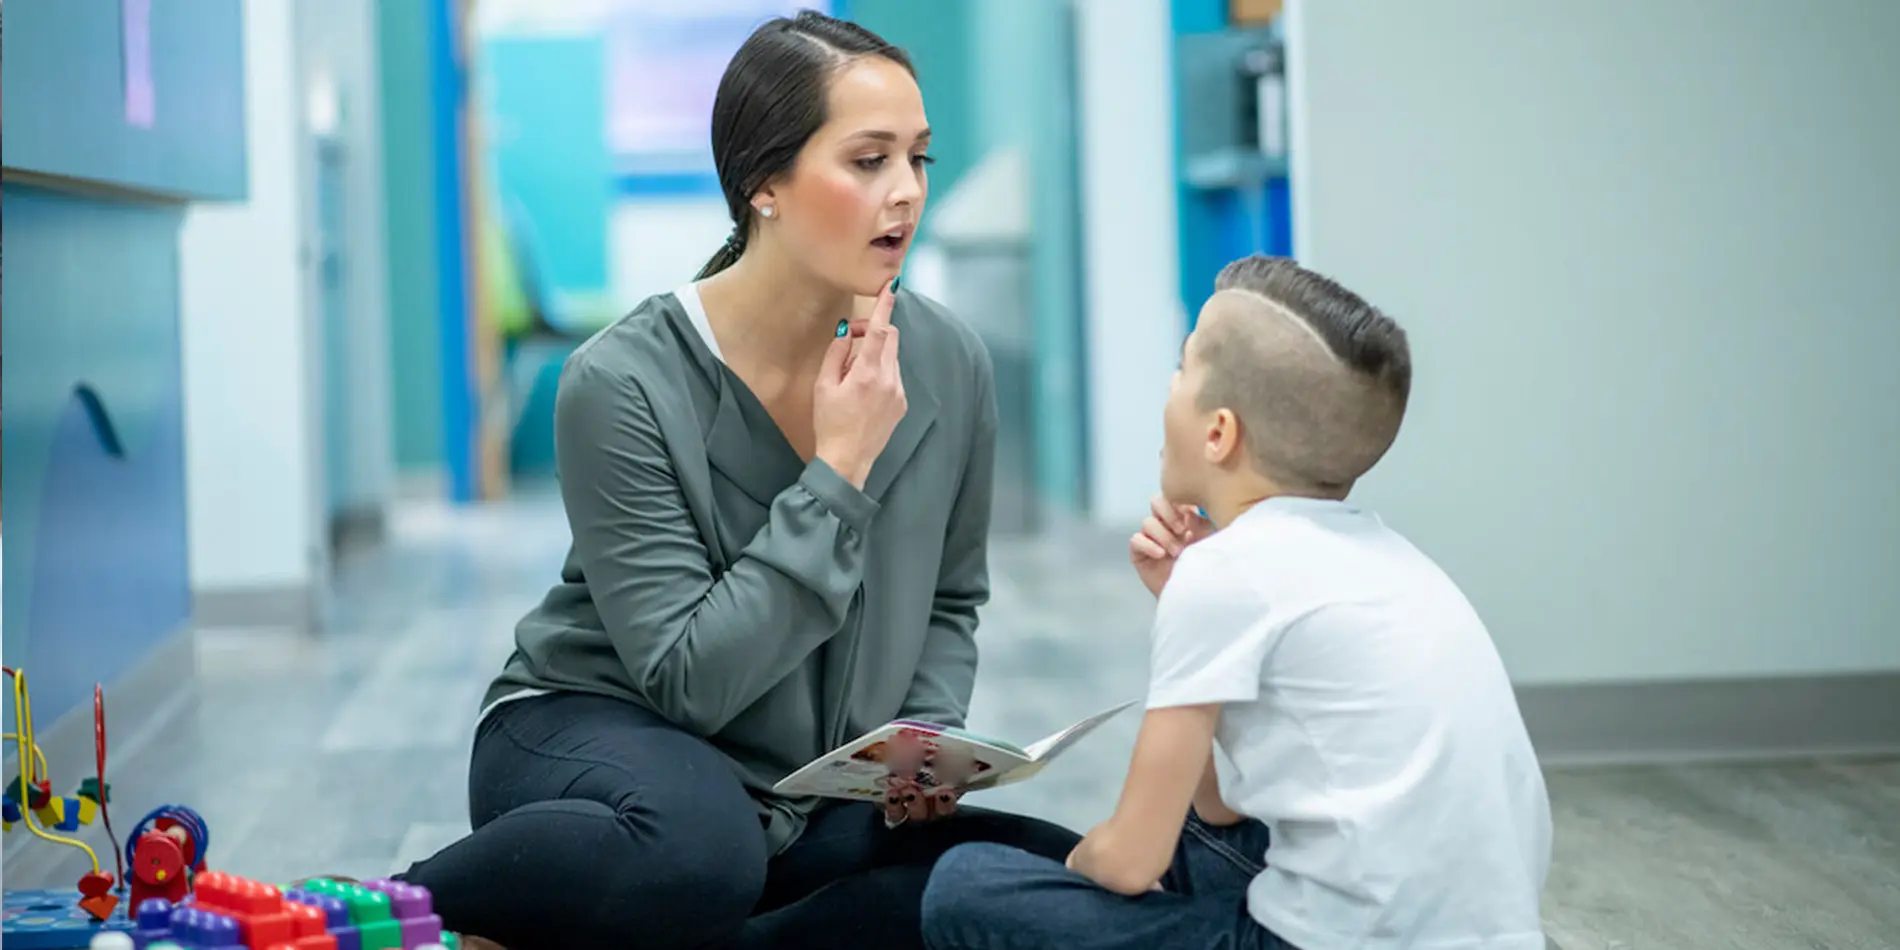 A speech-language pathologist is sitting on the ground in a classroom and pointing to her mouth as she pronounces something. A young person sits across from her and is mimicking the expression.